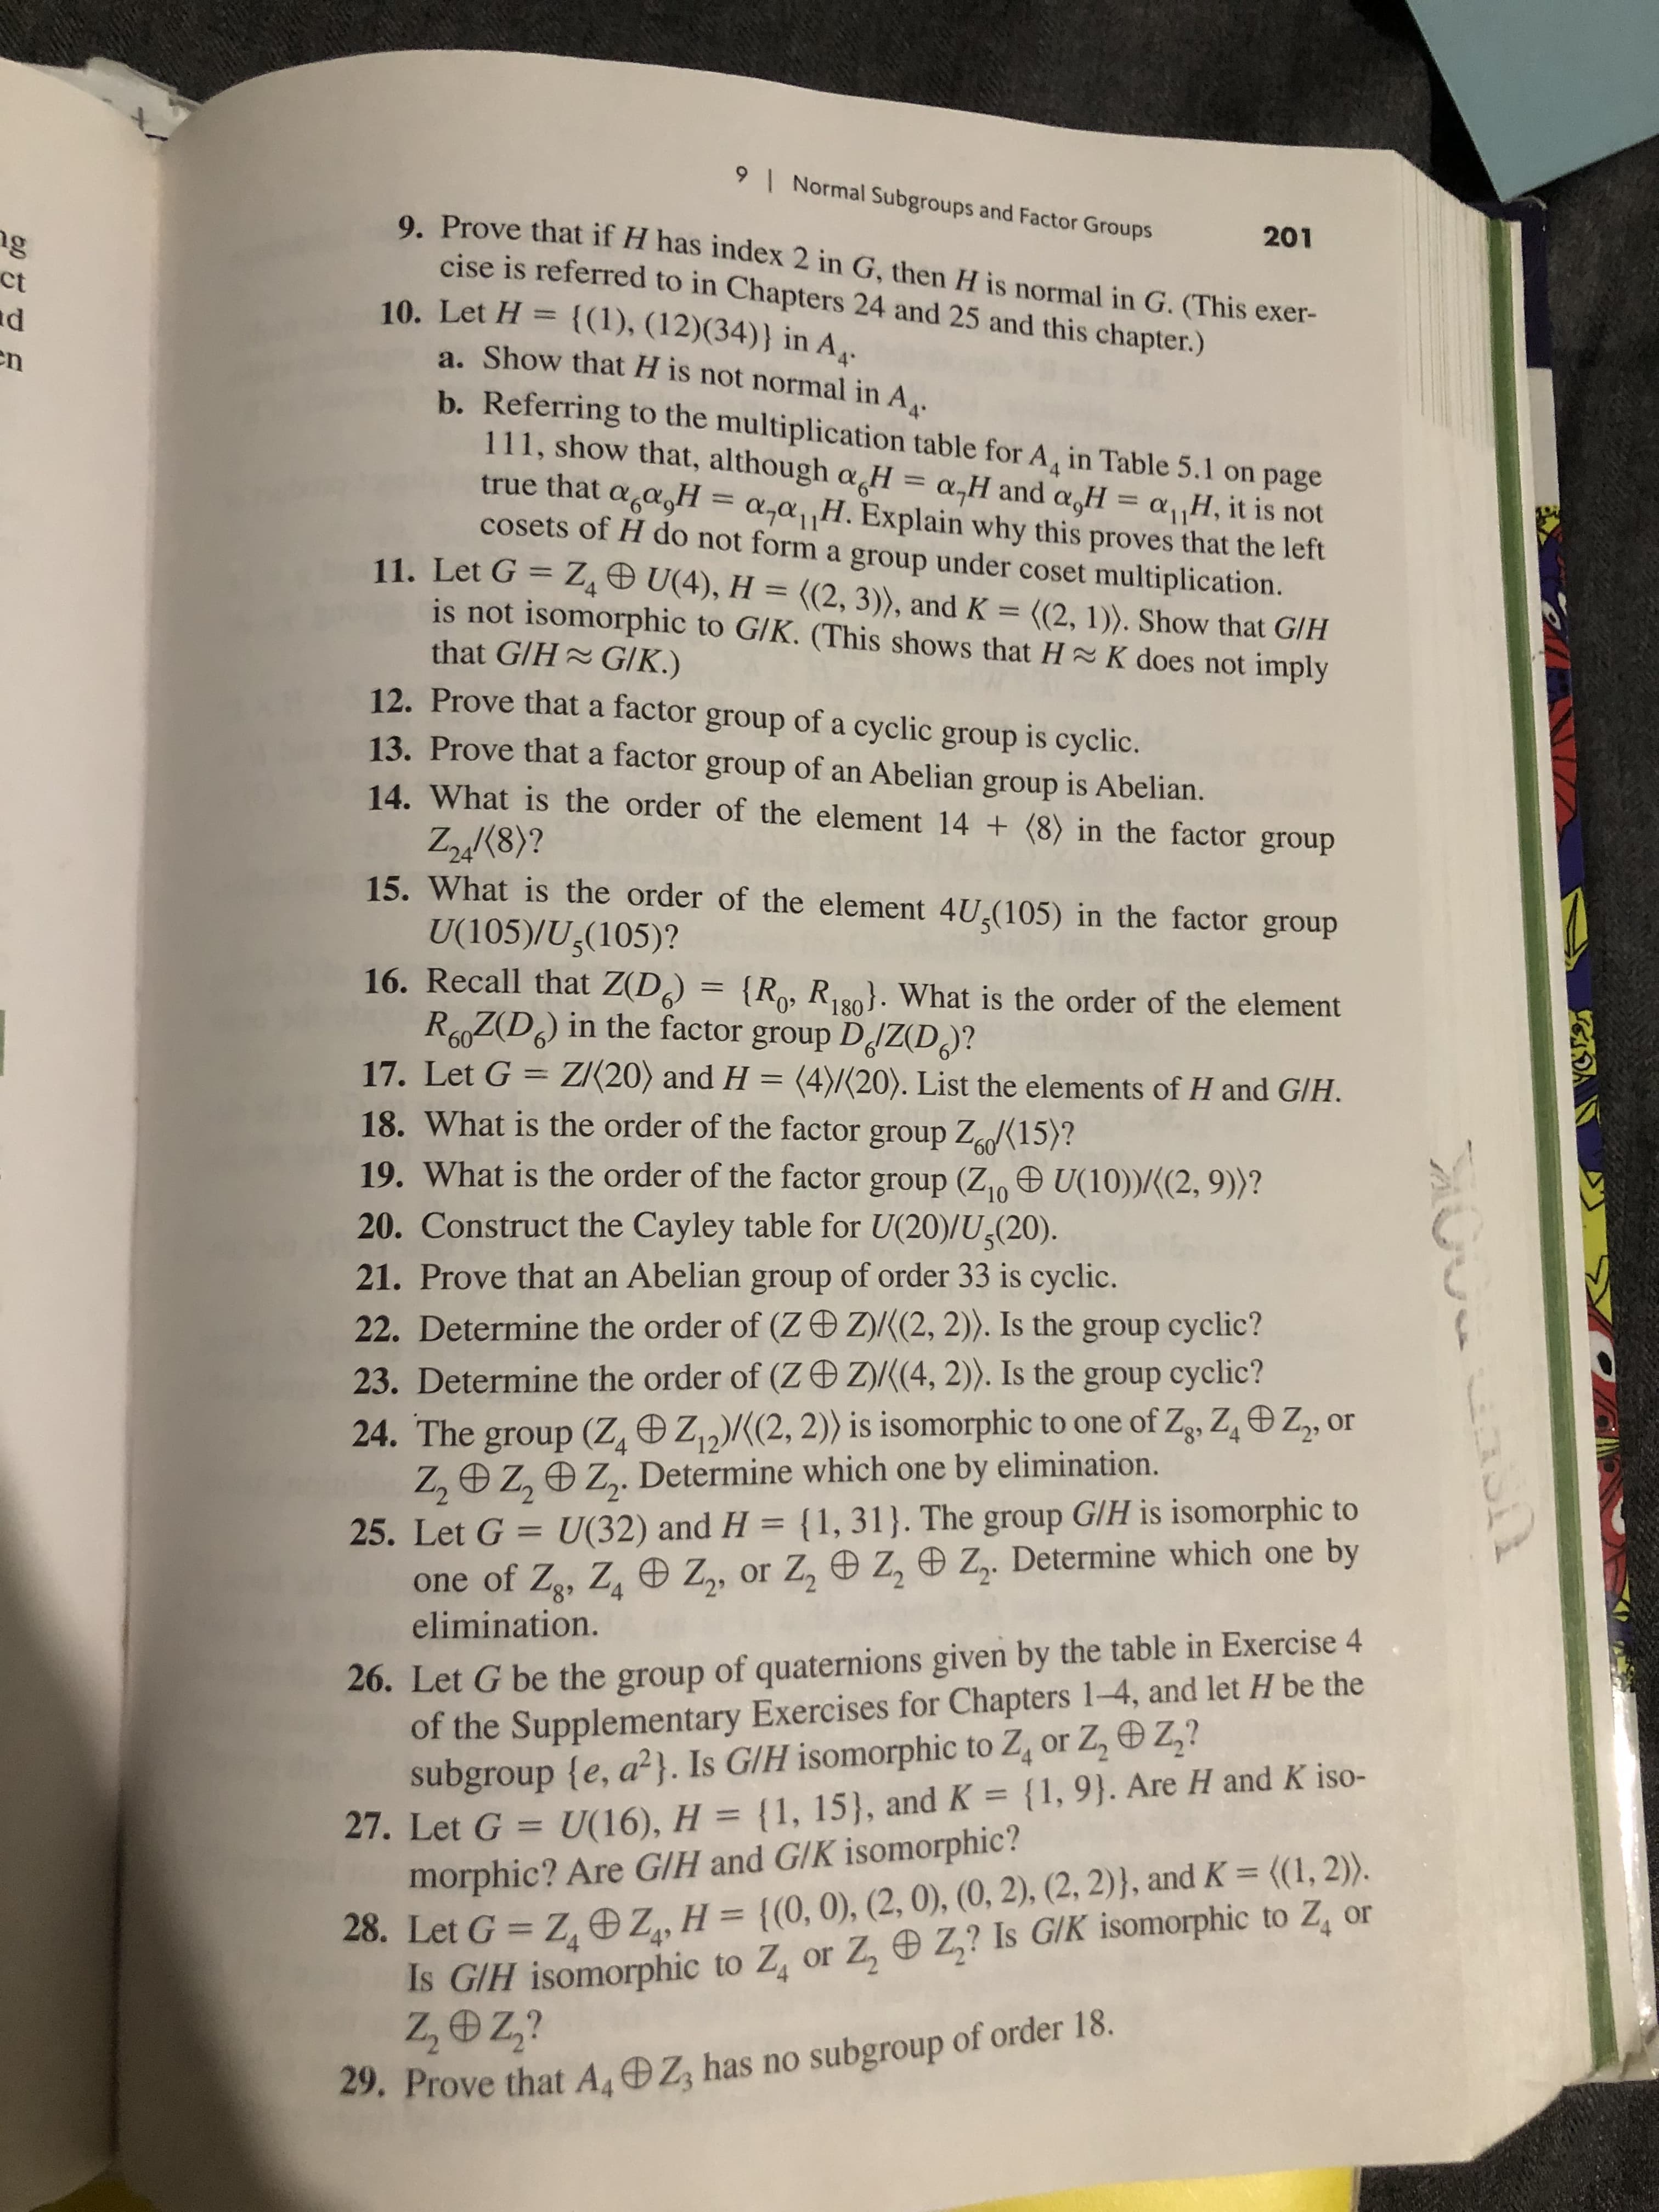 9
Normal Subgroups and Factor Groups
201
9. Prove that if H has index 2 in G, then H is normal in G. (This exer-
cise is referred to in Chapters 24 and 25 and this chapter.)
gg
ct
d
10. Let H {(1), (12)(34)} in A,.
a. Show that H is not normal in A,.
n
b. Referring to the multiplication table for A, in Table 5.1 on page
111, show that, although a H = a,H and a,H = a,,H, it is not
that agasH= a,a1
cosets of H do not form a group under coset multiplication.
H.Explain why this proves that the left
11. Let G Z U(4), H = ((2, 3), and K =
is not isomorphic to G/K. (This shows that H~ K does not imply
that G/H GIK.)
12. Prove that a factor group of a cyclic group is cyclic.
13. Prove that a factor group
((2, 1)). Show that G/H
of
Abelian group is Abelian.
14. What is the order of the element 14 (8) in the factor
an
group
Zn(8)?
15. What is the order of the element 4U(105) in the factor group
U(105)/U,(105)?
16. Recall that Z(D) =
RZ(D) in the factor group DdZ(D?
{Rp, R). What is the order of the element
180
60
ZI20) and H = (4)/(20). List the elements of H and G/H.
17. Let G
18. What is the order of the factor group Z15)?
19. What is the order of the factor group (Z U(10))/(2, 9))?
20. Construct the Cayley table for U(20)/U(20).
60
10
21. Prove that an Abelian group of order 33 is cyclic.
22. Determine the order of (Z D Z)((2, 2). Is the group cyclic?
Z)/((4, 2). Is the group cyclic?
23. Determine the order of (Z
24. The group (Z, Z2)(2, 2)) is isomorphic to one of Zg, Z Z, or
Z, Z, Z,. Determine which one by elimination.
25. Let G U(32) and H (1, 31). The group GIH is isomorphic to
one of Zg, Z Z, or Z, e Z, Z. Determine which one by
elimination.
4
26. Let G be the group of quaternions given by the table in Exercise 4
of the Supplementary Exercises for Chapters 1-4, and let H be the
subgroup {e, a2}. Is G/H isomorphic to Z, or Z, Z,?
27. Let G = U(16), H = {1, 15), and K {1, 9}. Are H and K iso-
morphic? Are G/H and G/K isomorphic?
28. Let G Z, Z, H= {(0, 0), (2, 0), (0, 2), (2, 2)}, and K= {(1, 2)).
Is GIH isomorphic to Z, or Z, Z,? Is GIK isomorphic to Z, or
Z,Oz?
4
4
29. Prove that AOZ has no subgroup of order 18
N
aull
